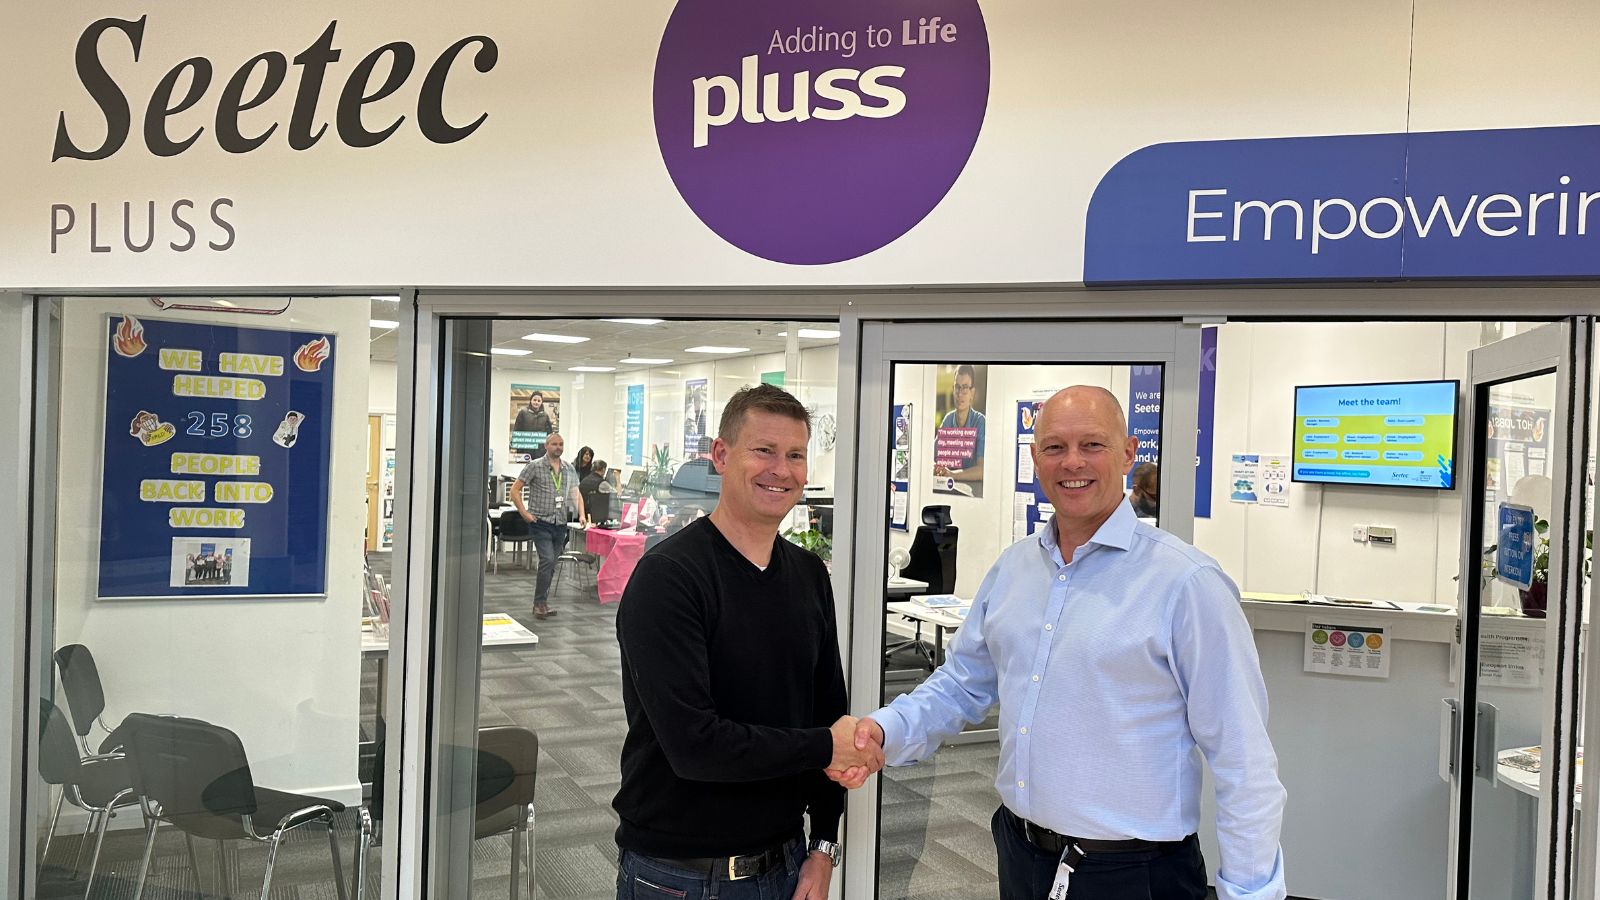 Justin Madders MP is welcomed to Seetec Pluss by Operations Manager, Pete Carr